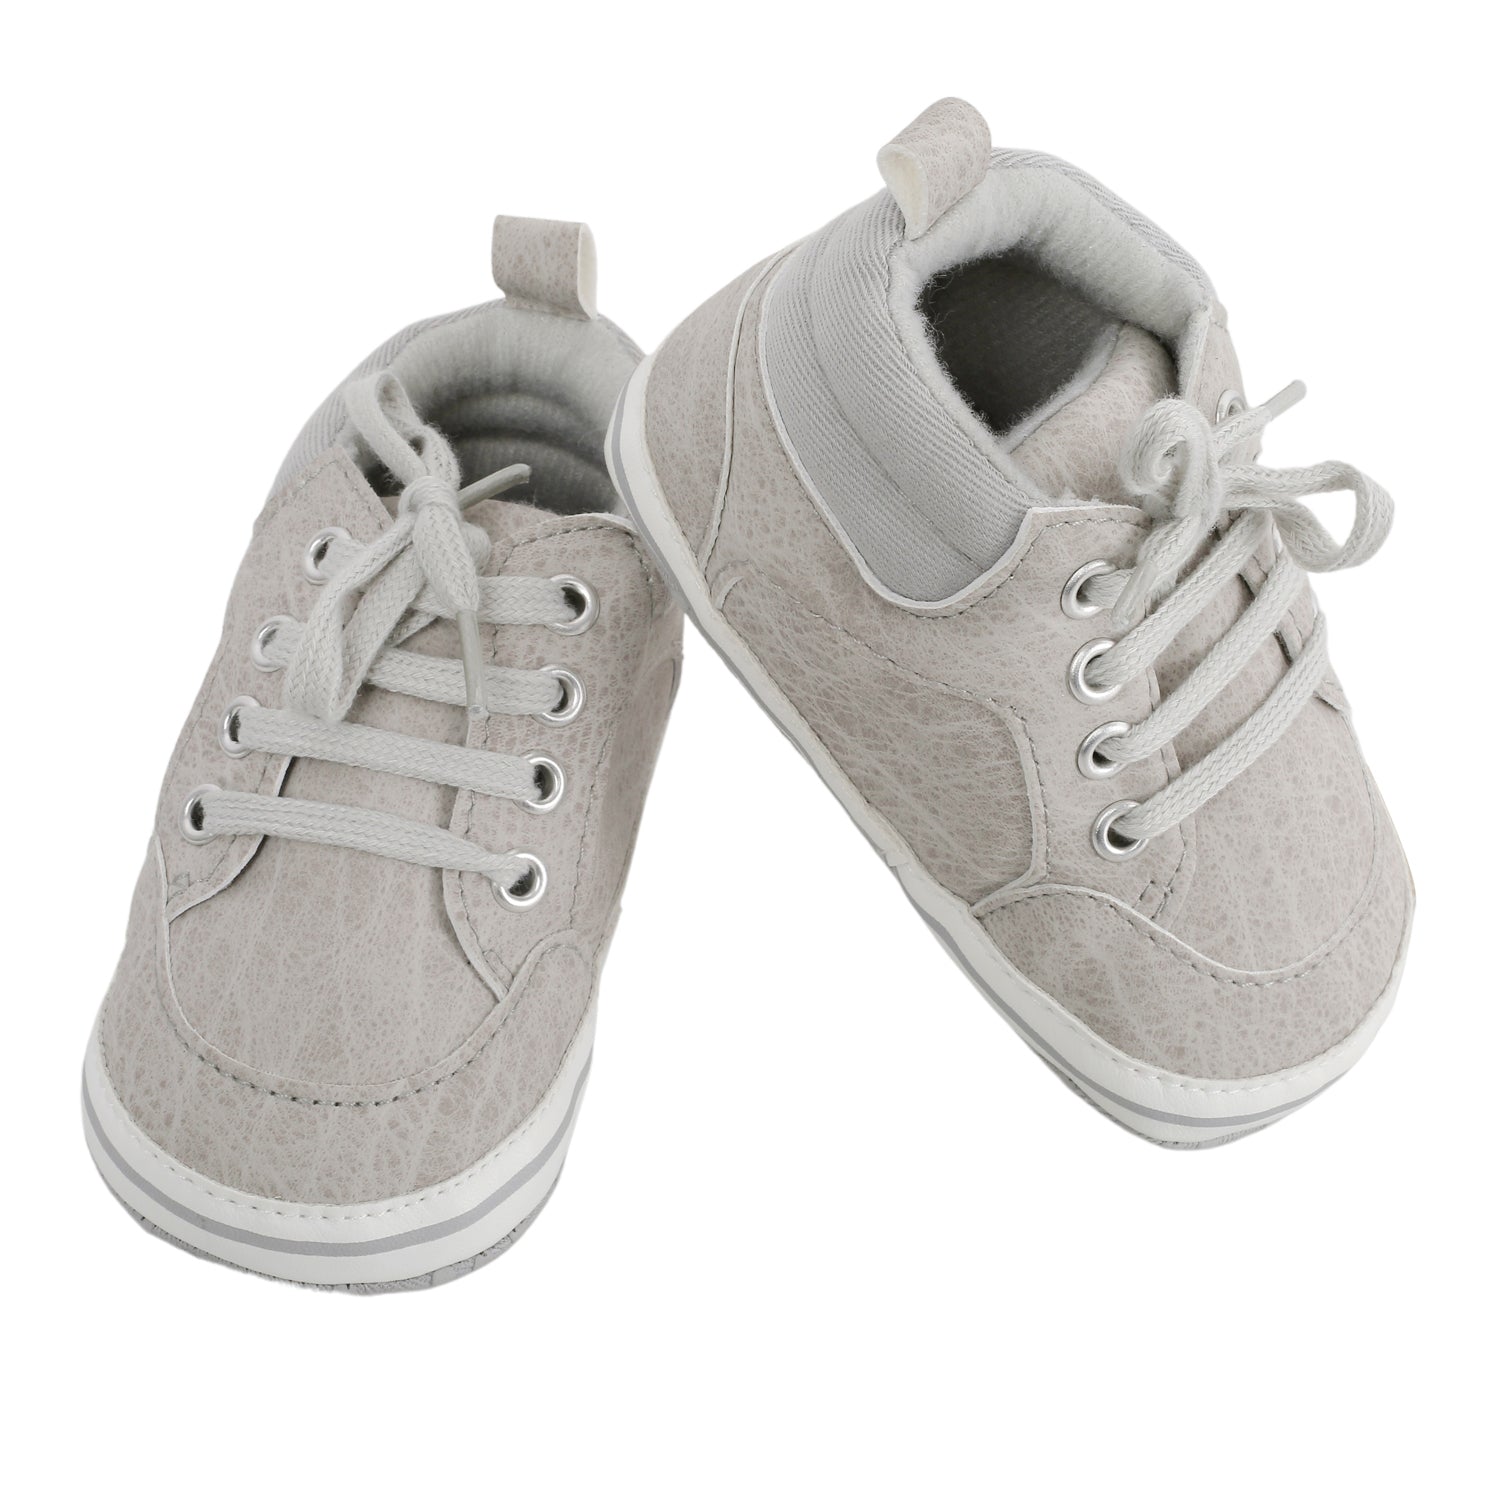 Trainers - White/Grey - Men | H&M IN